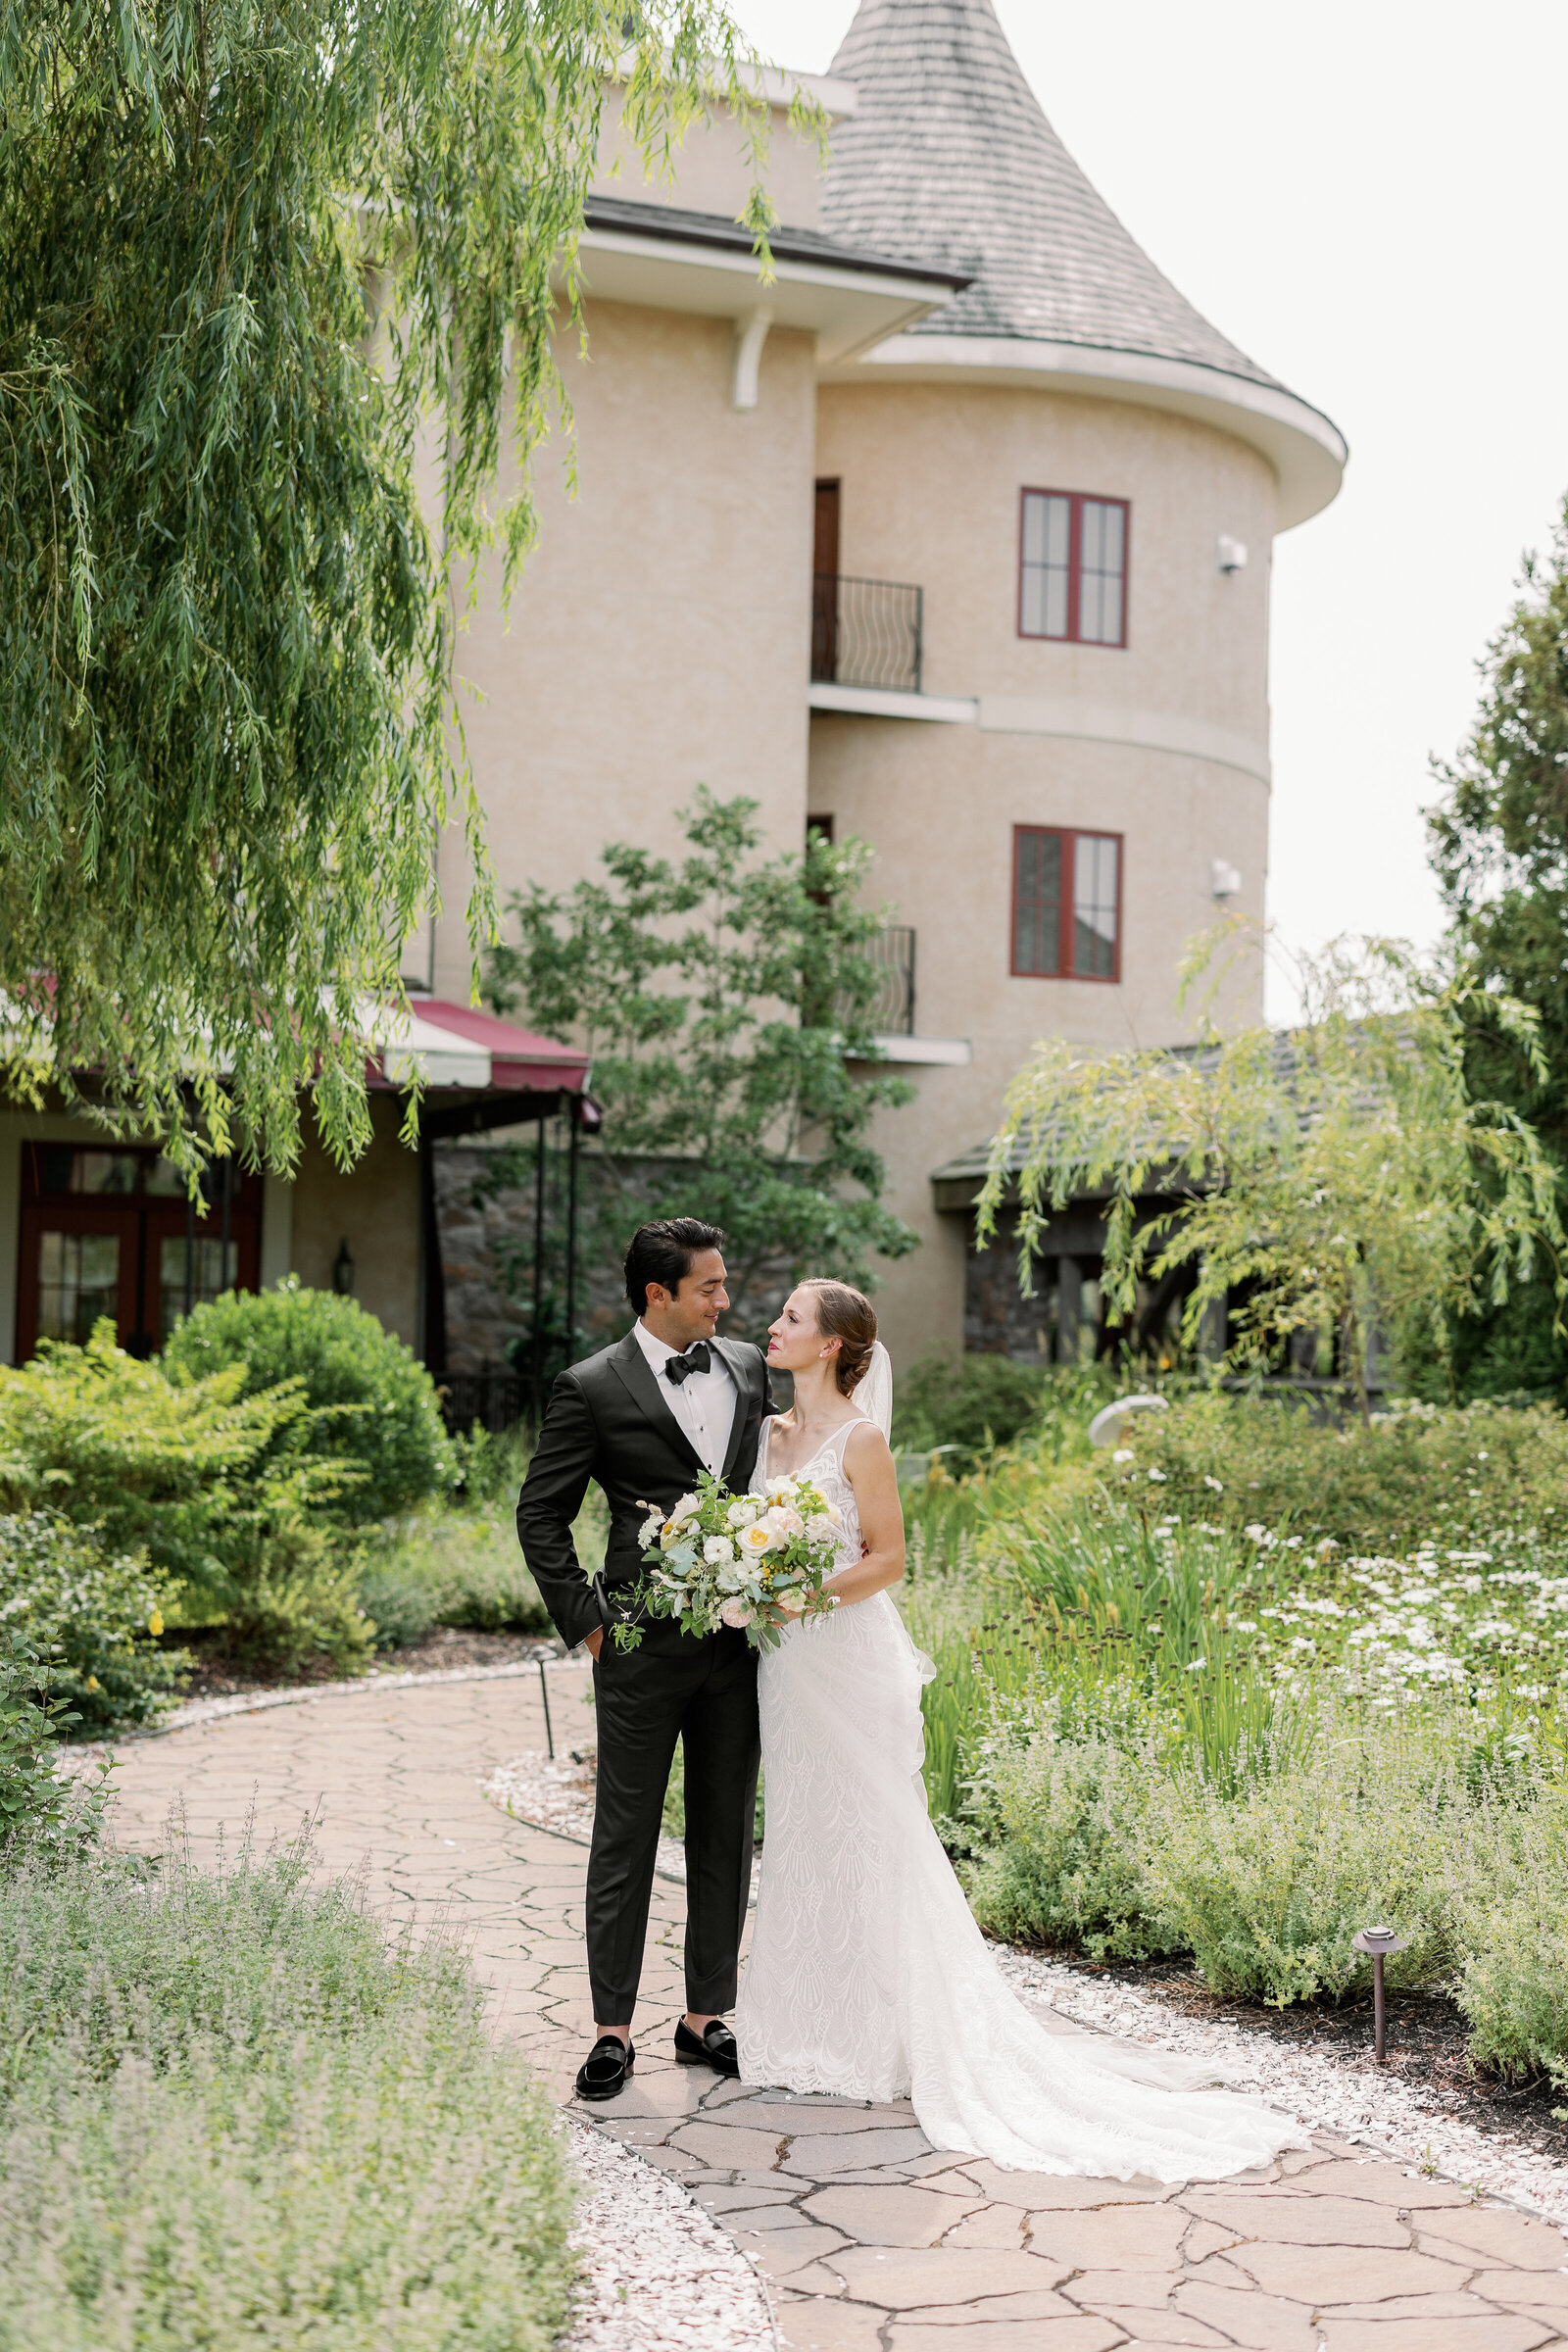 Wedding couple standing on a small path in front of a large, cottage like building.